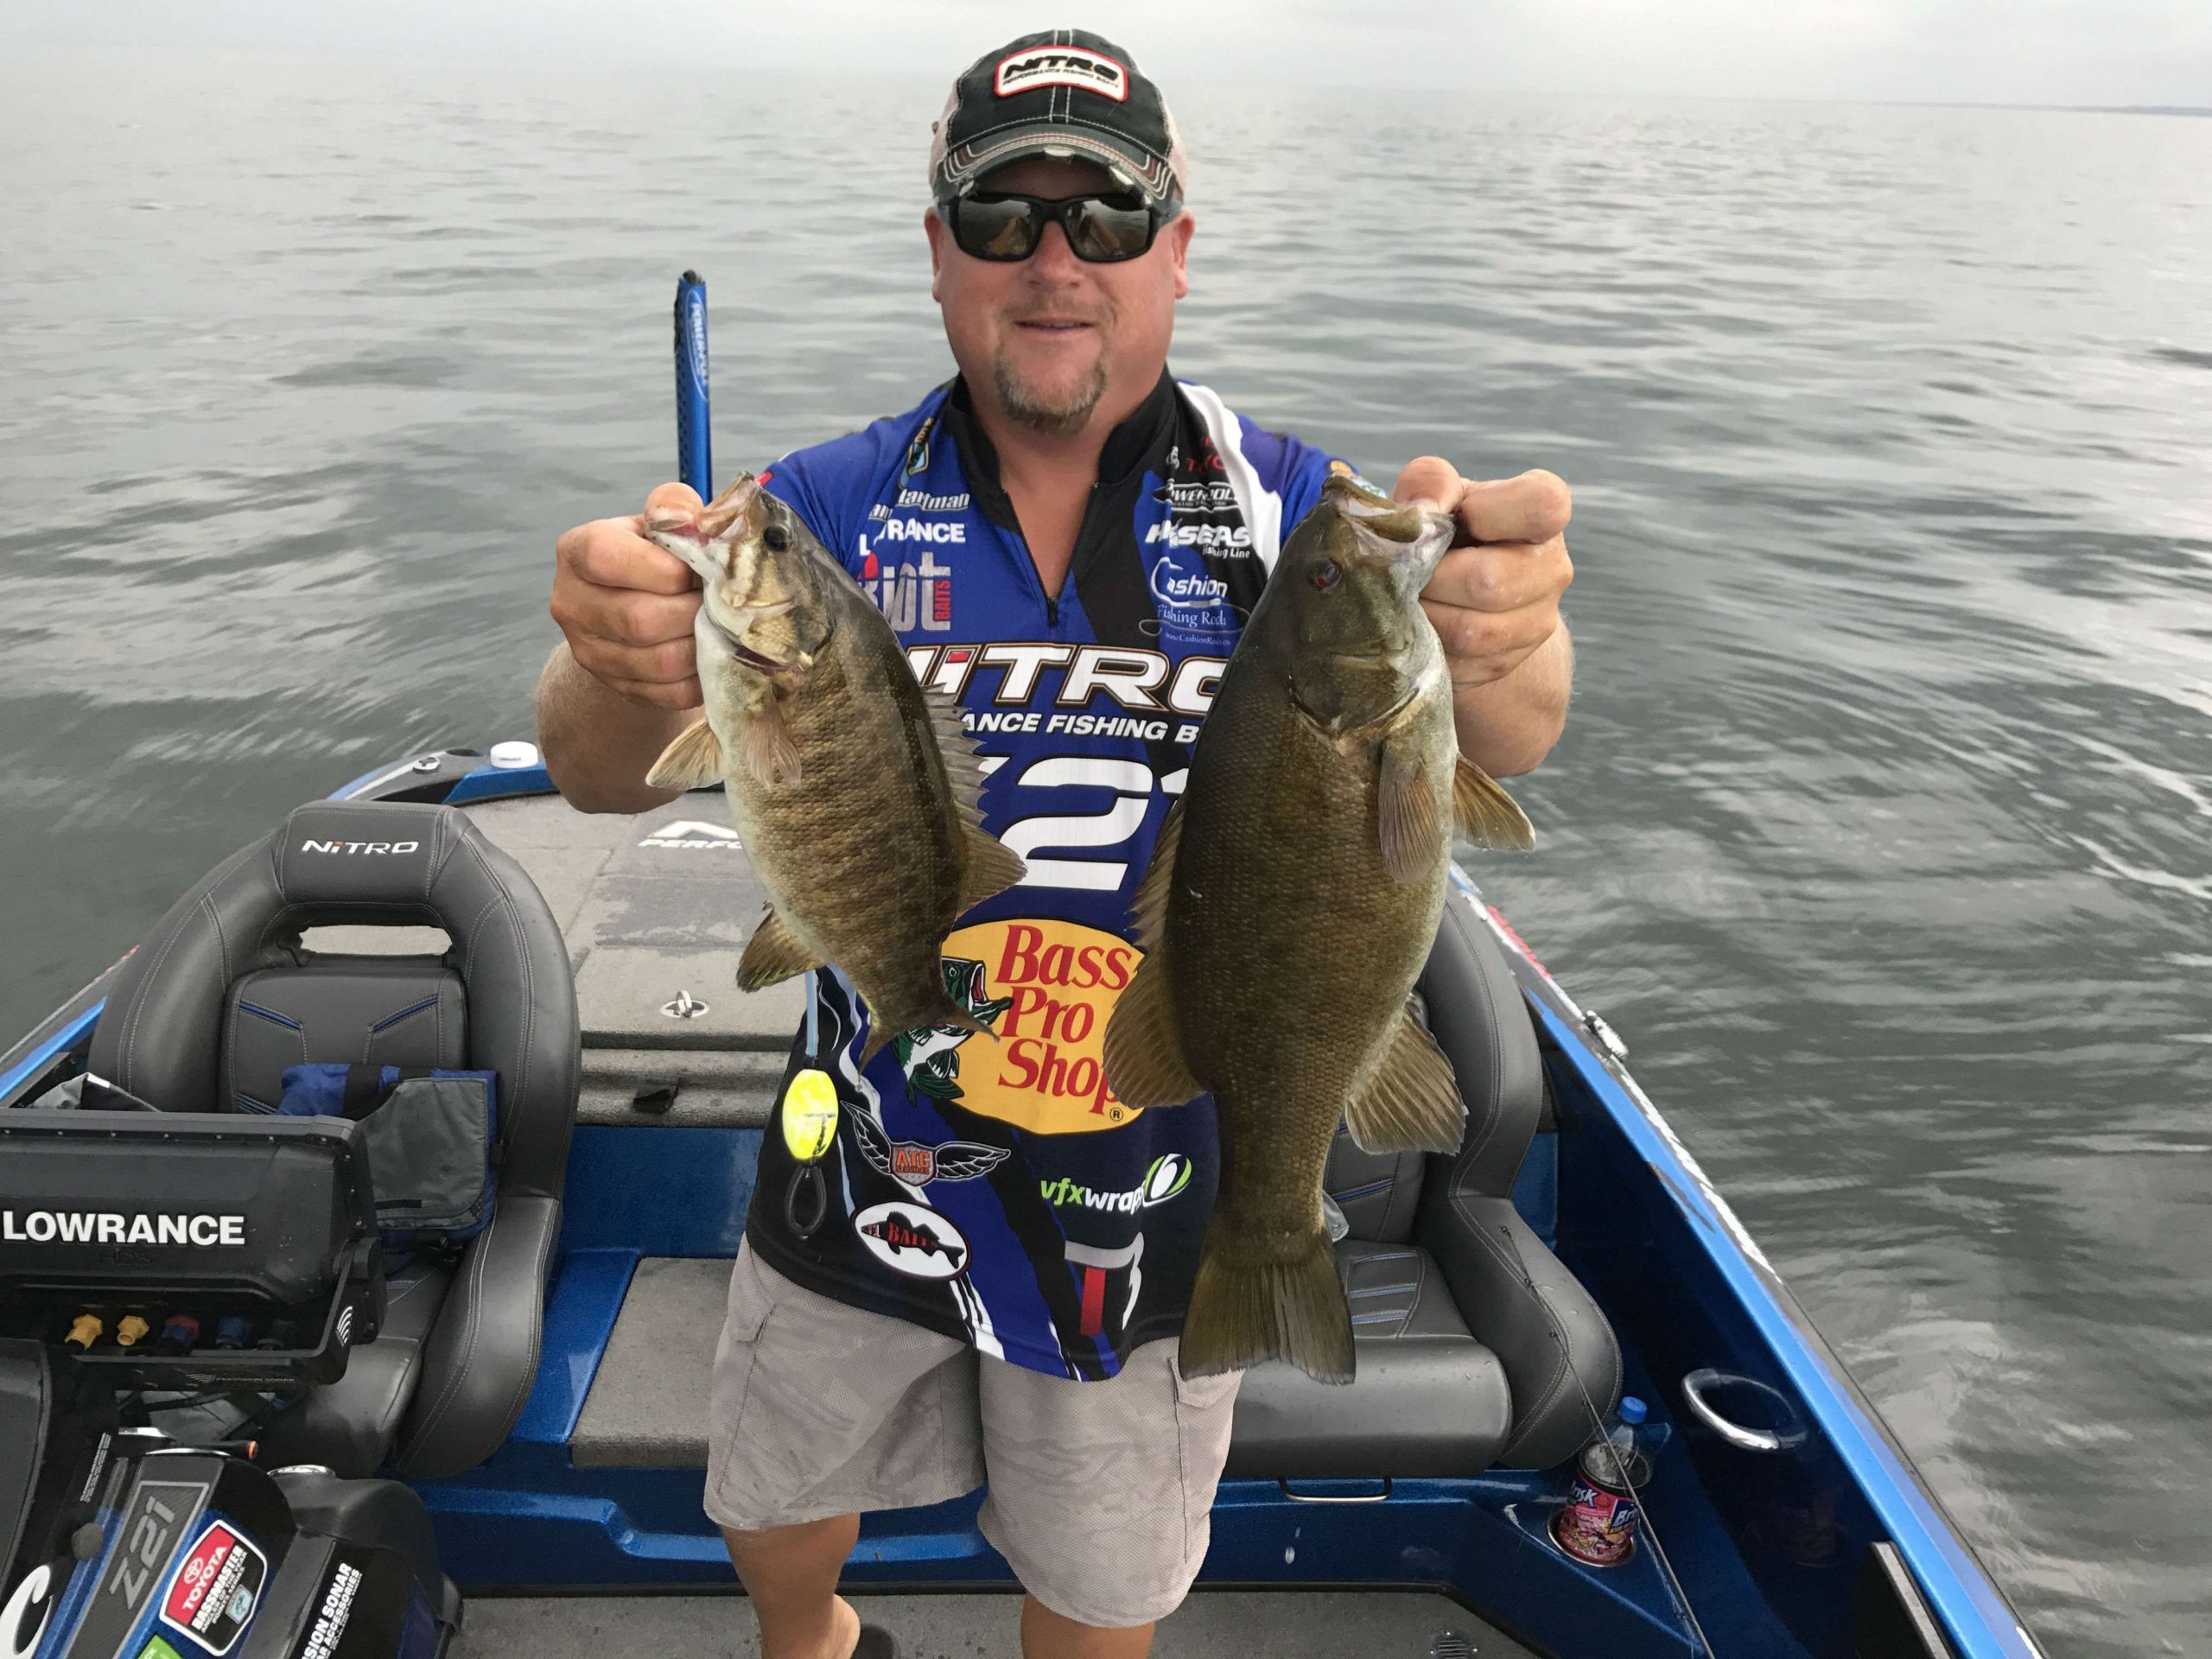 36th place: Jamie Hartman (36-15) stumbled big on Day 1, allowing Dustin Connell to take the lead in the ROY race. Day 2 was much better with a 23-10 stringer that put him back on top by six points. He will need more of the Day 2 performance to take the title.